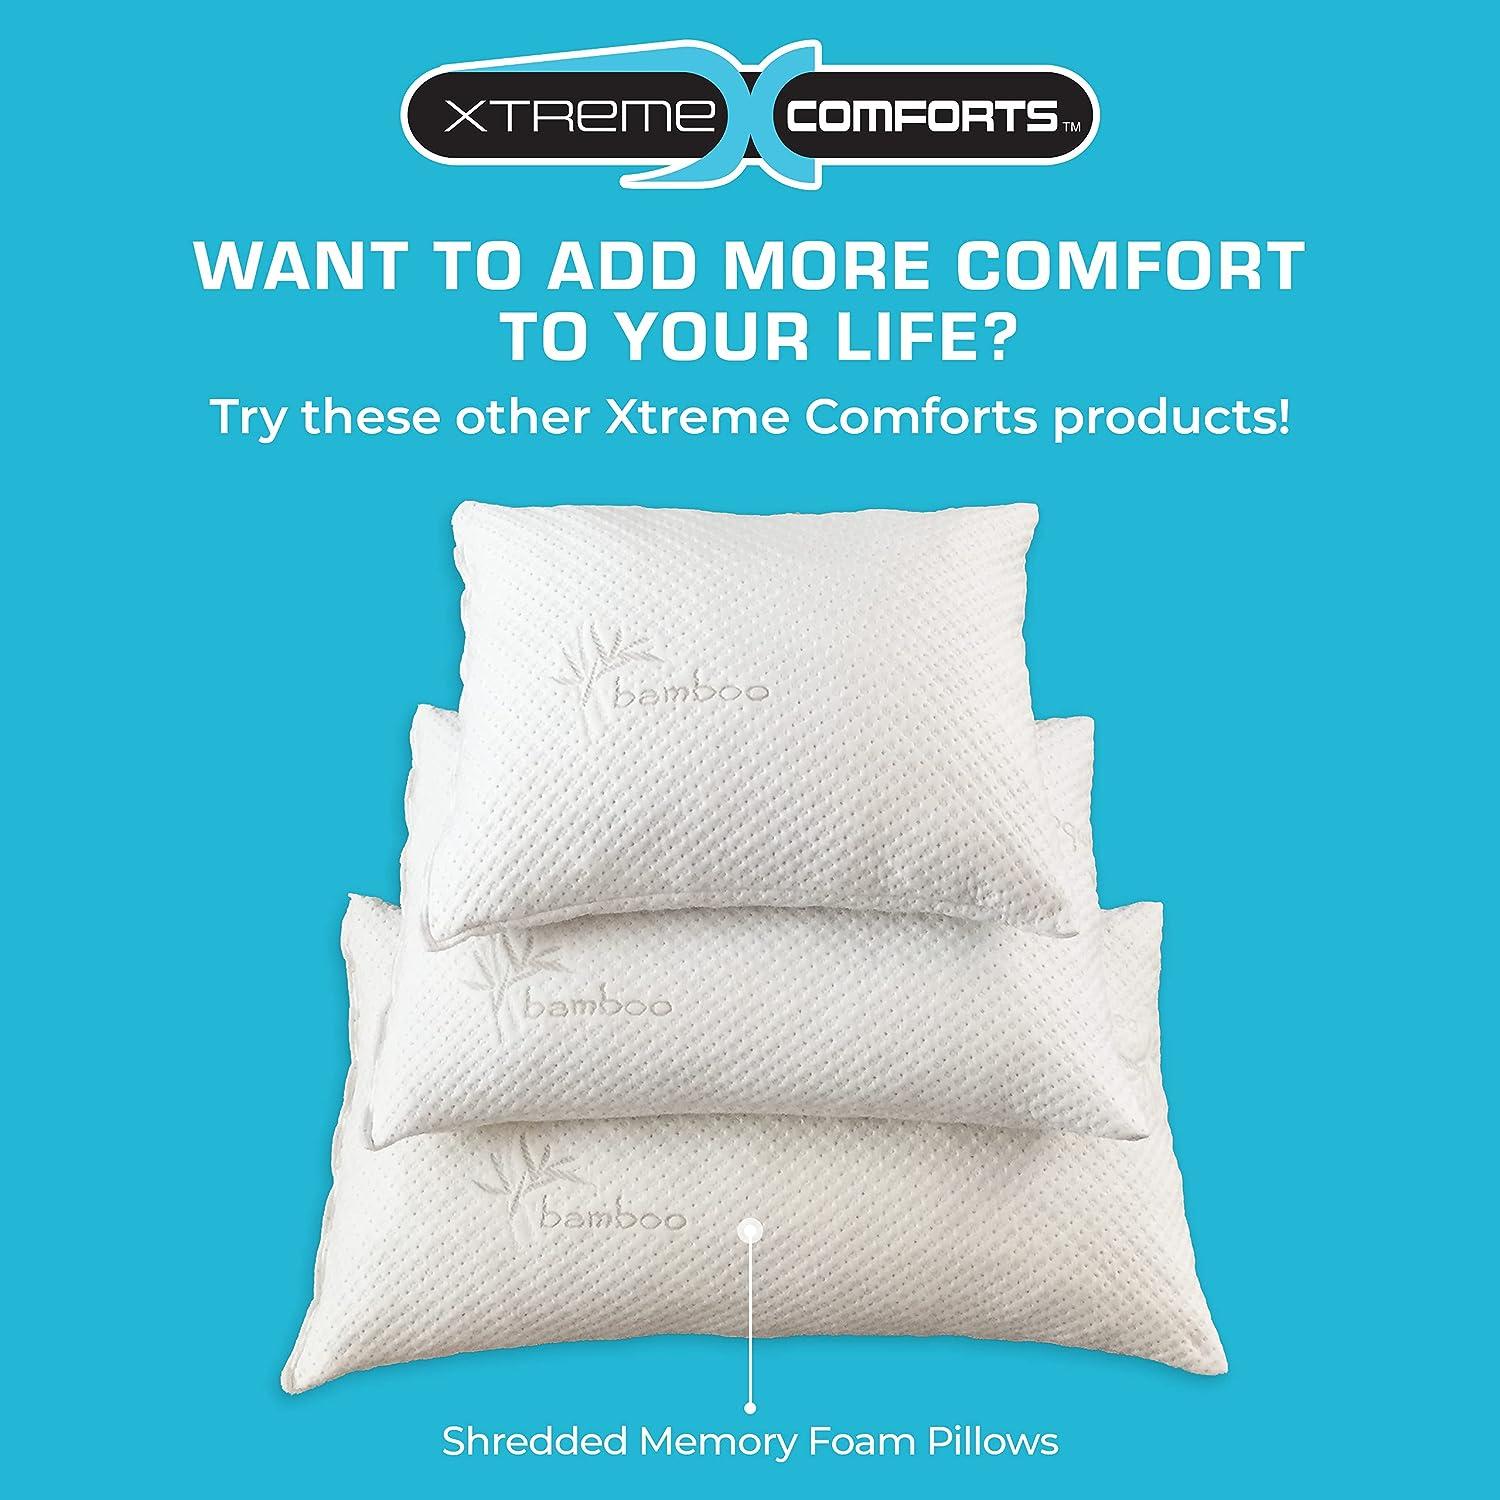 Xtreme Comforts 5 LBS Bean Bag Filler w/Shredded Memory Foam - Pillow  Stuffing Material for Couch Pillows, Cushions, Bean Bag Refill Filling, &  More